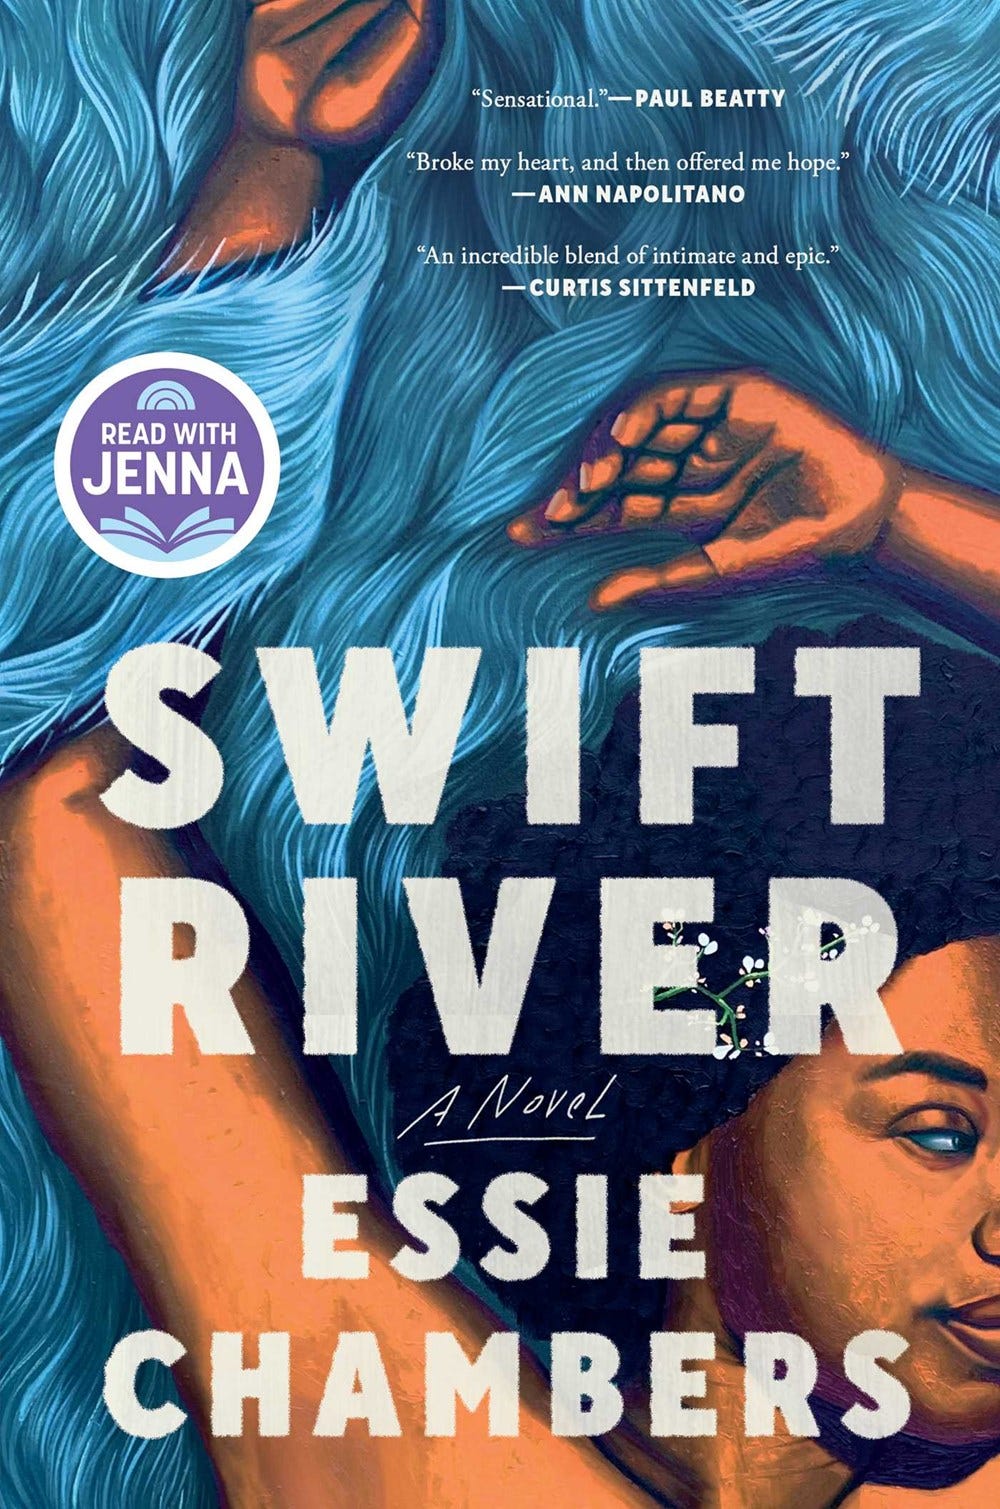 “Swfit River” Book Cover